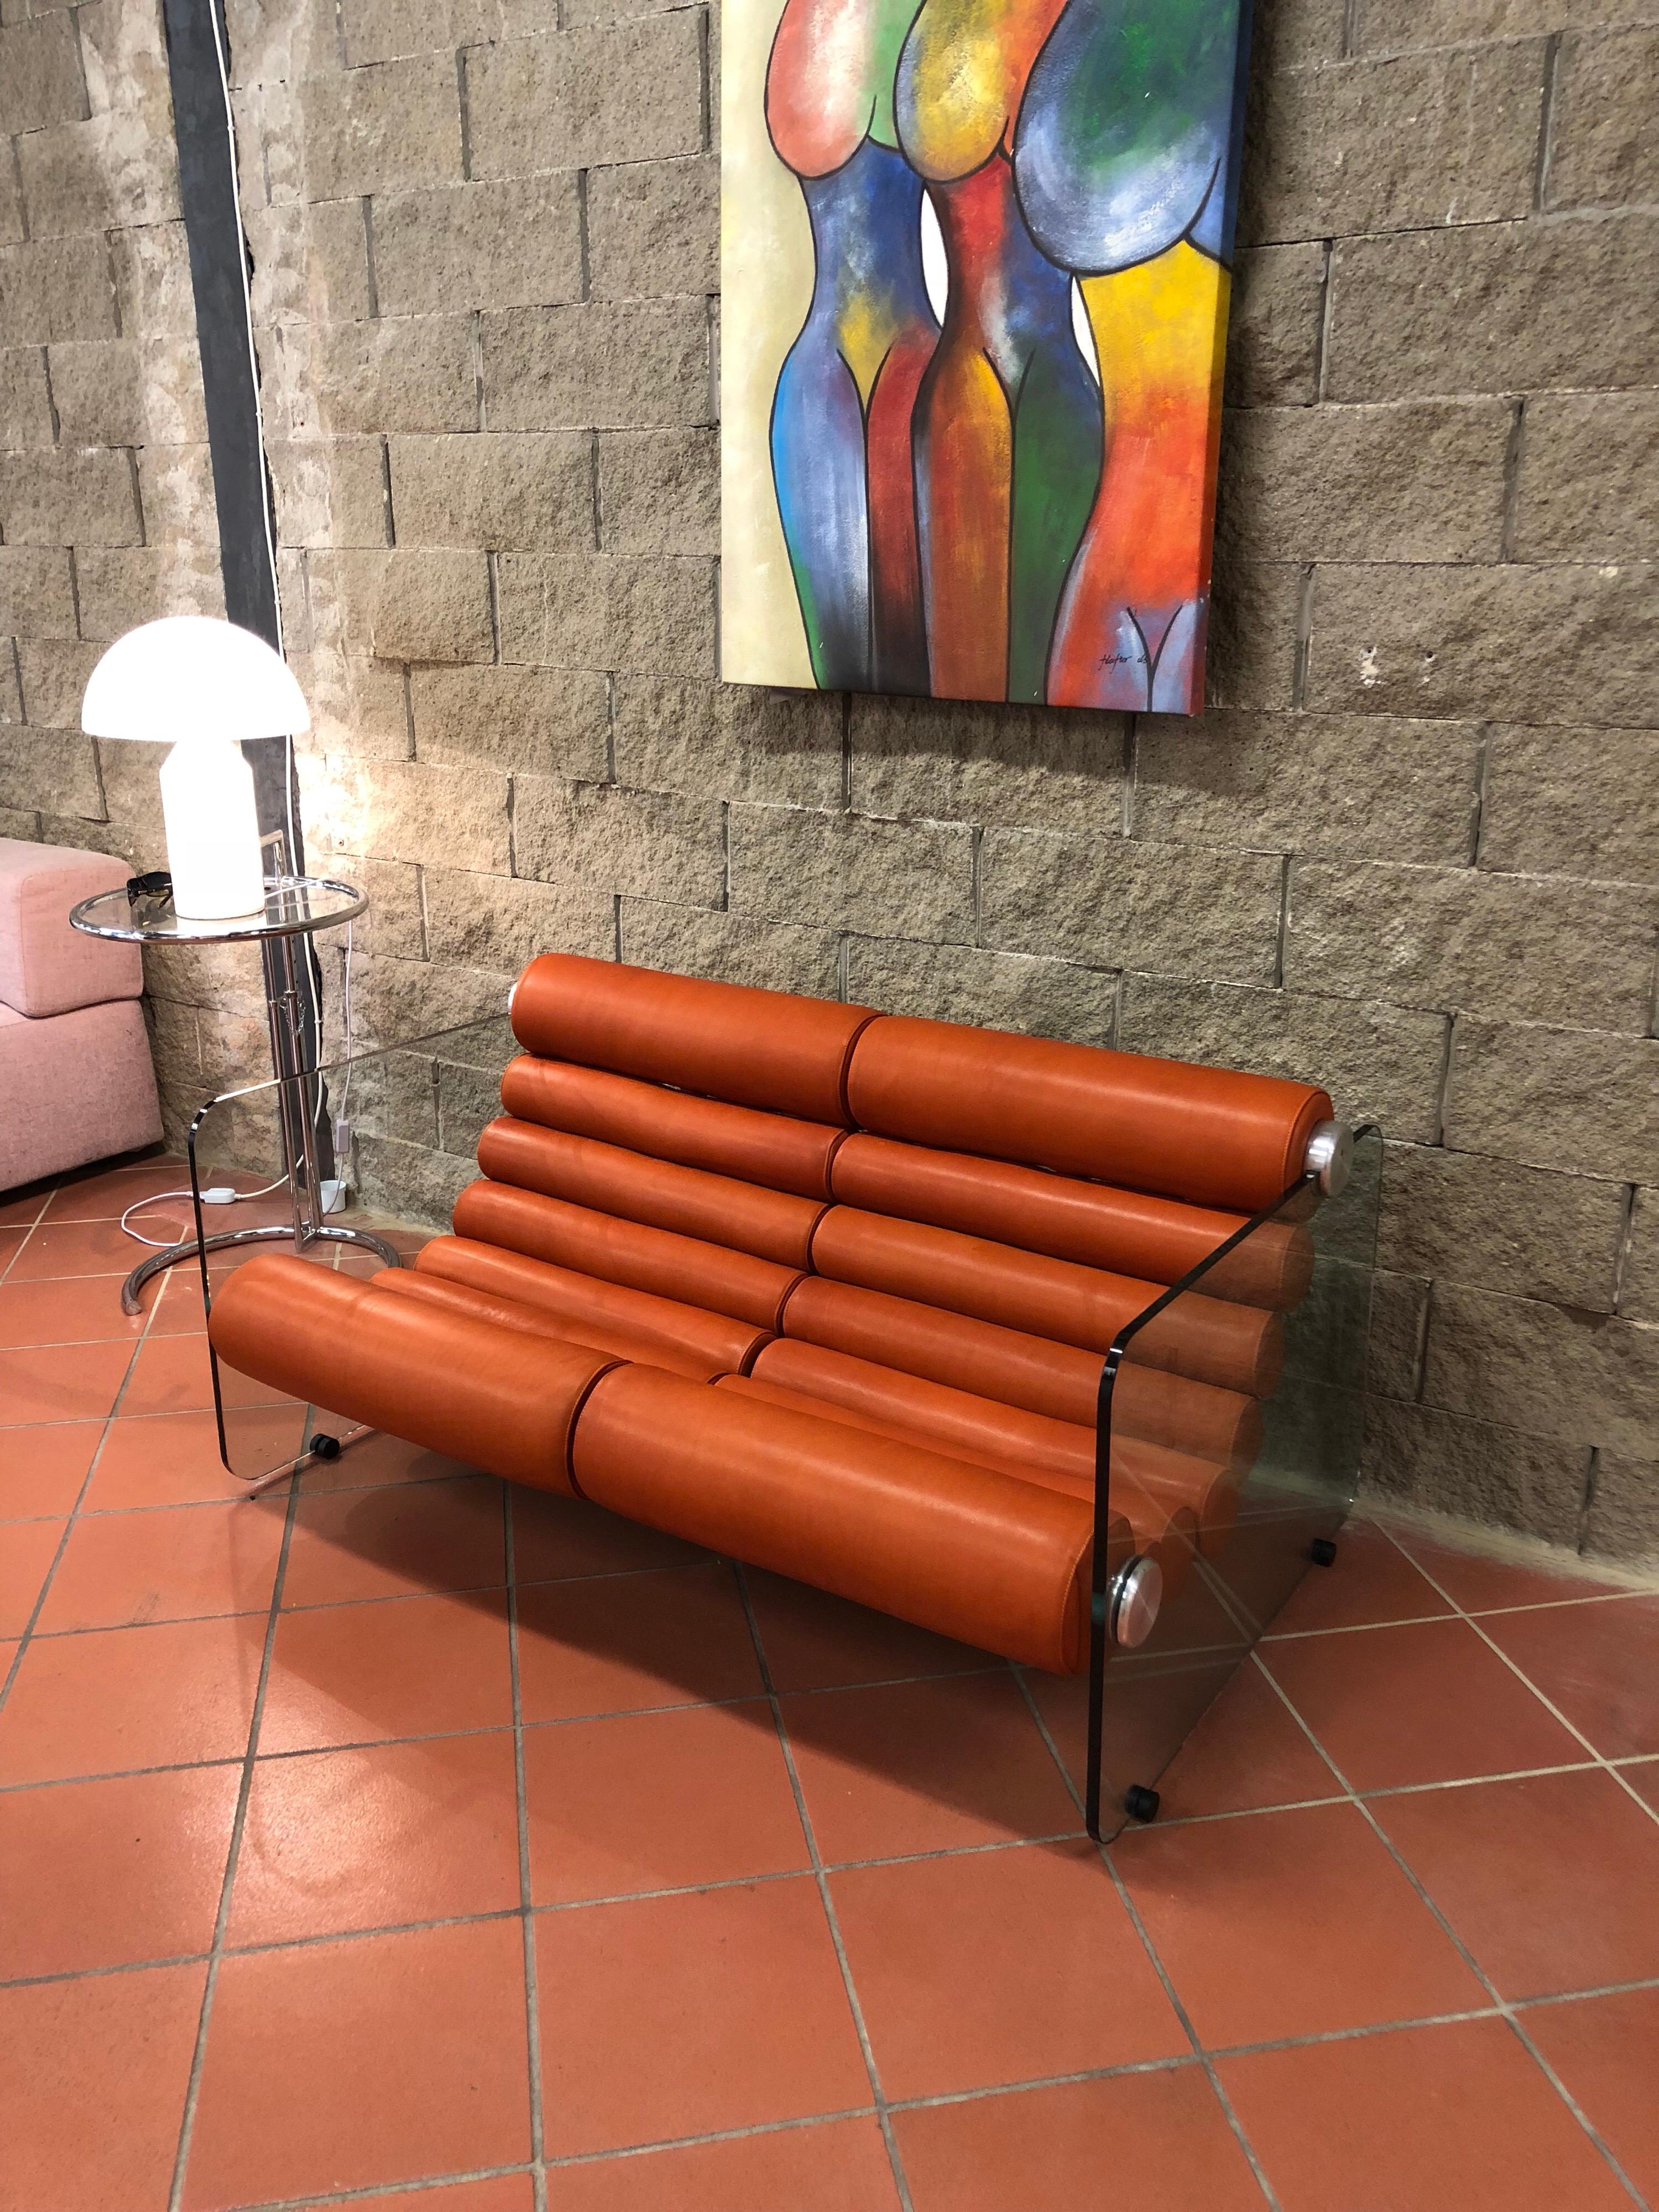 Rare Fabio Lenci two seats sofa for Comfort Line, Italy, 1967. Tempered glass, orange leather, steel structure. In a perfect state.